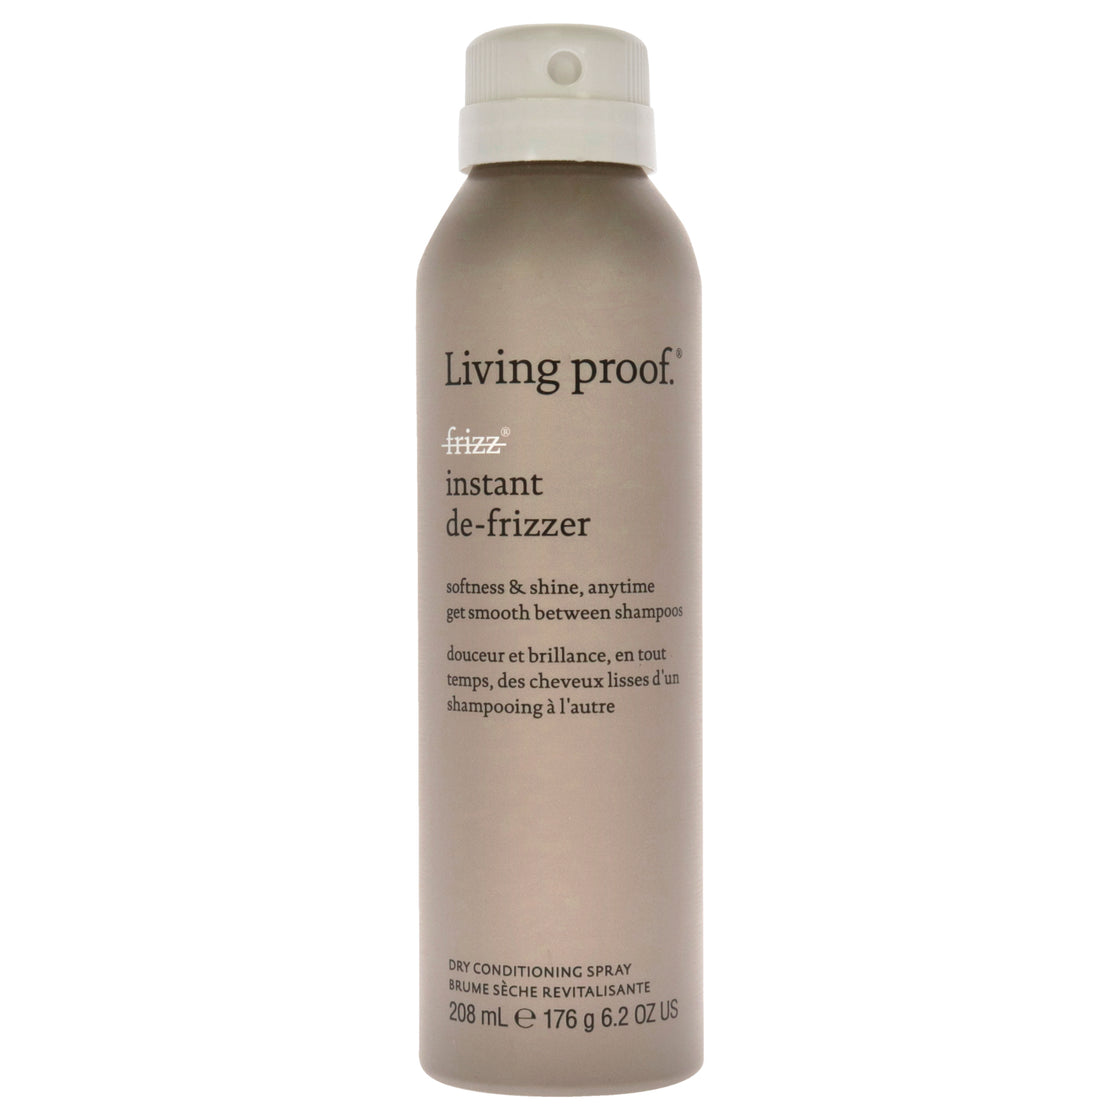 No-Frizz Instant De-Frizzer Dry Conditioning Spray by Living Proof for Unisex - 6.2 oz Hair Spray